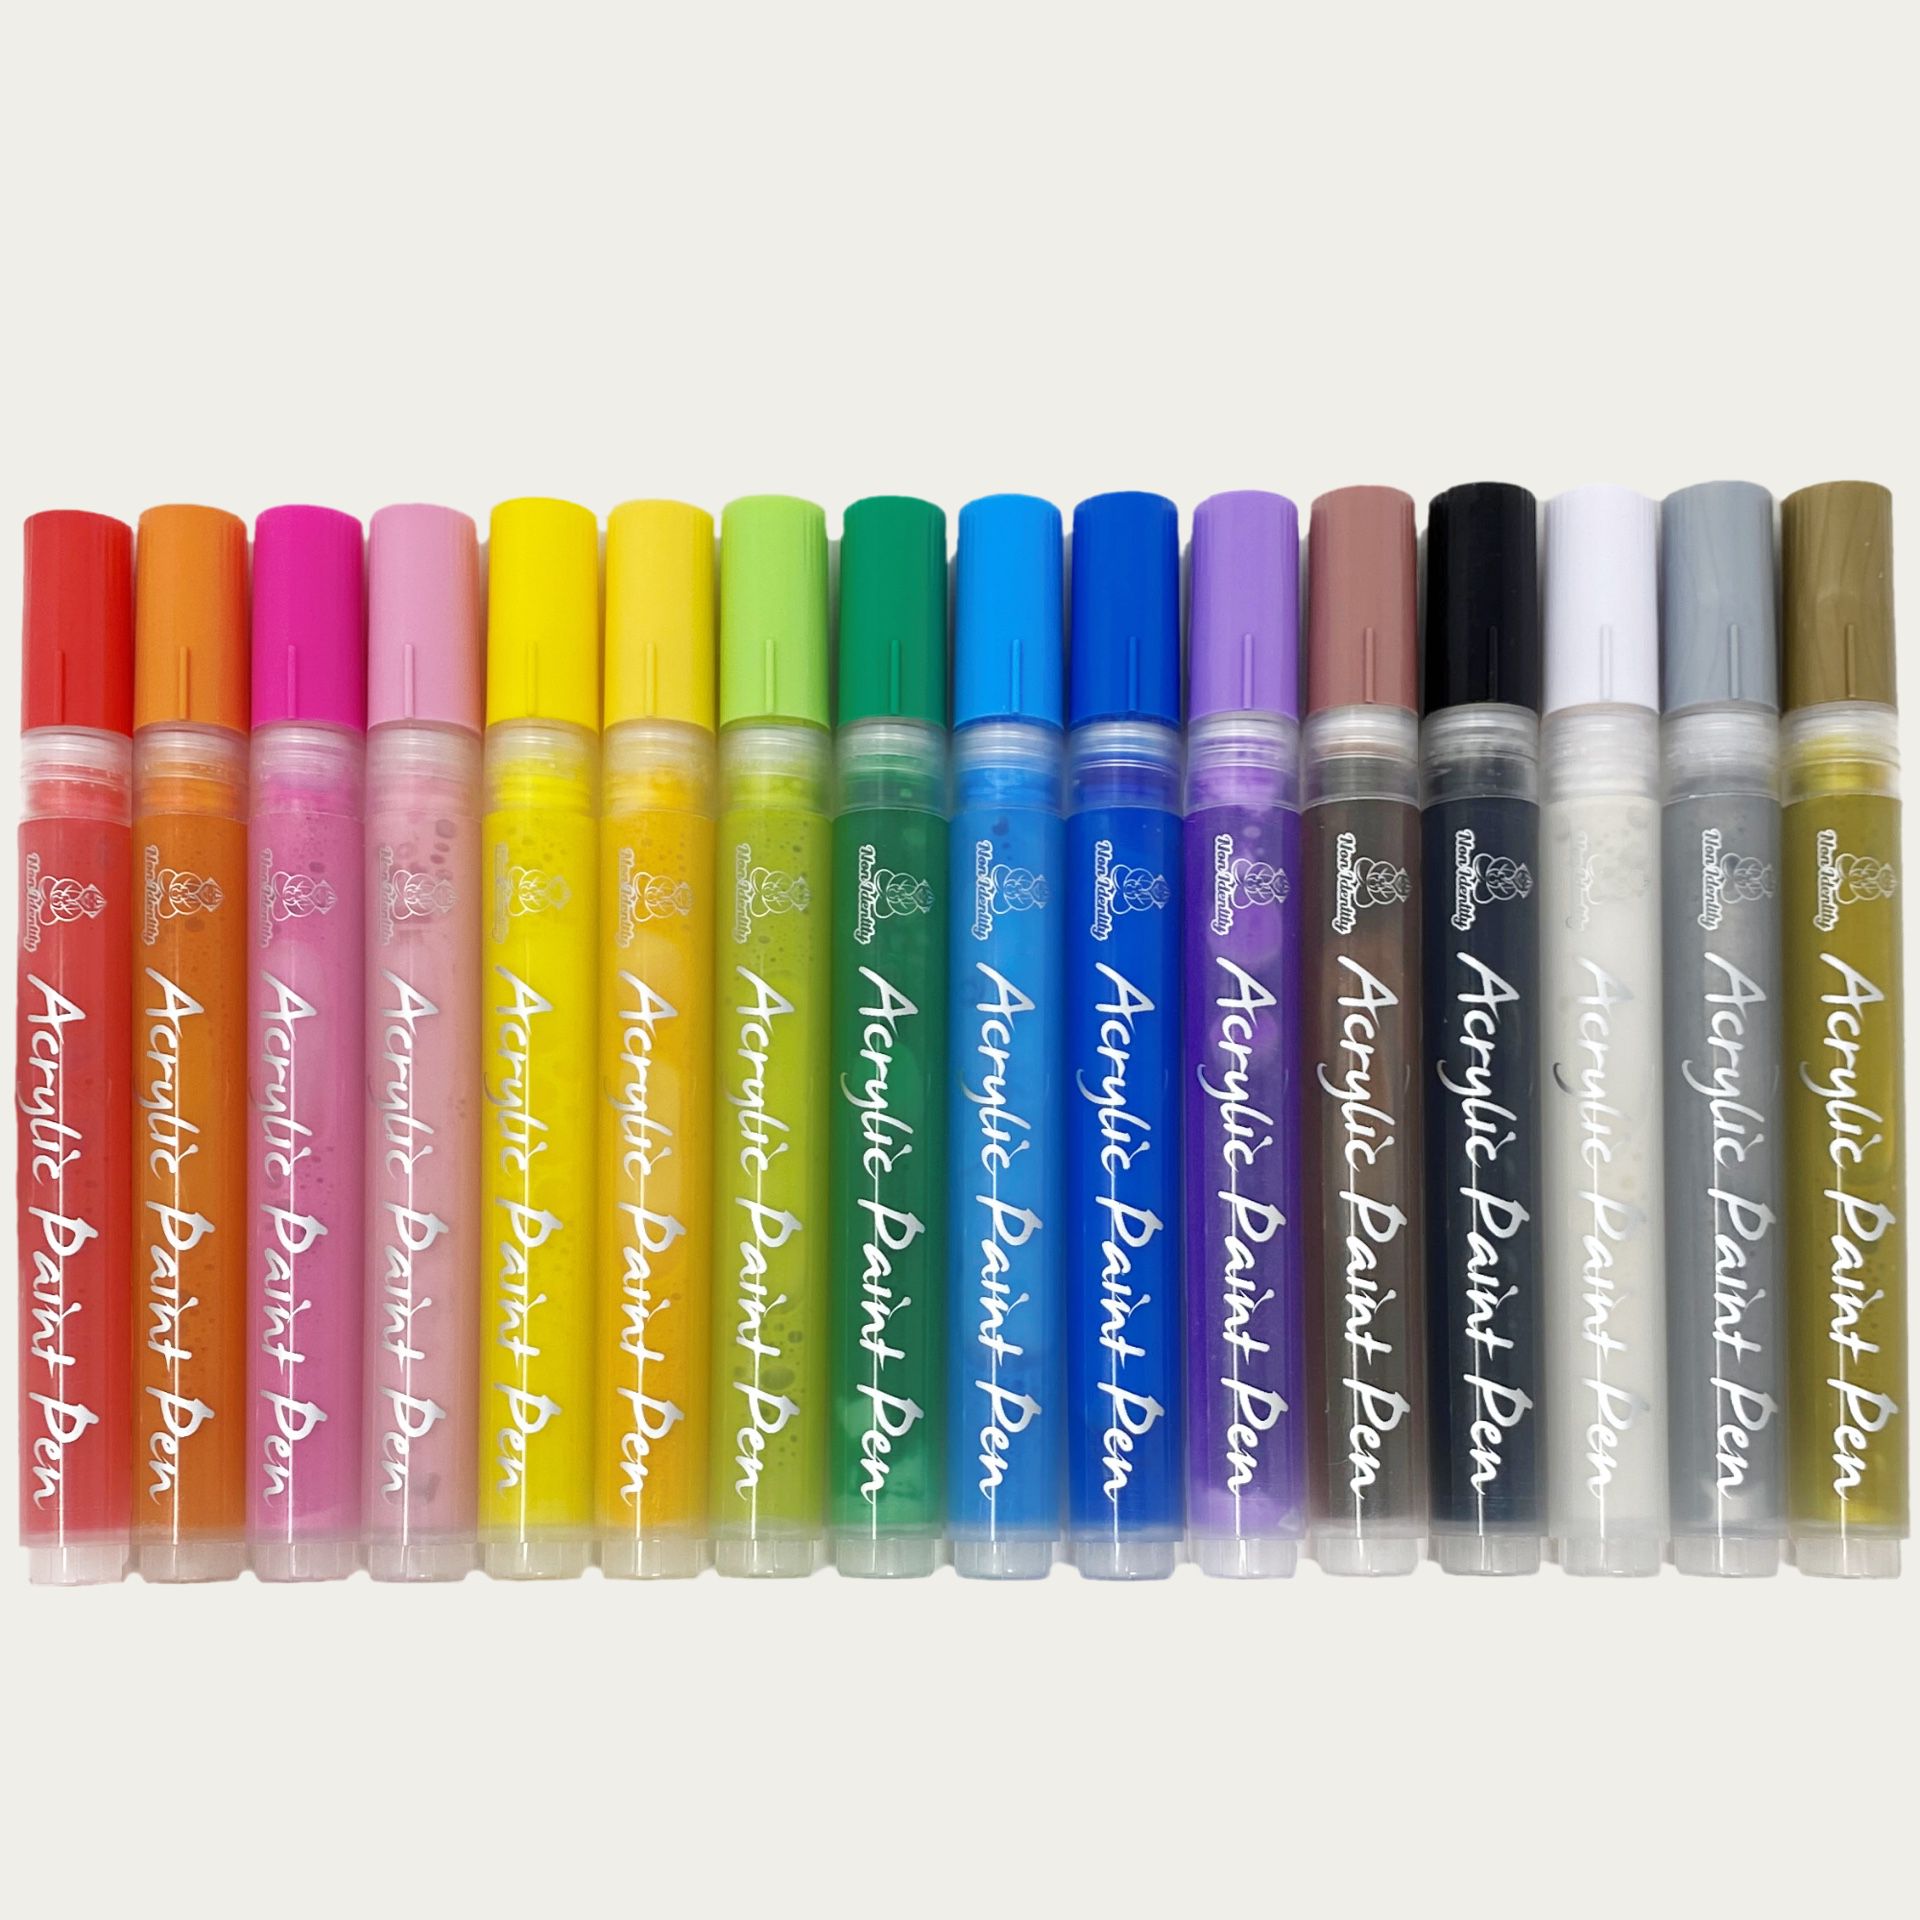 16 large acrylic paint pens with 2-3mm tips and cloth case! Free delivery for Columbus Area!